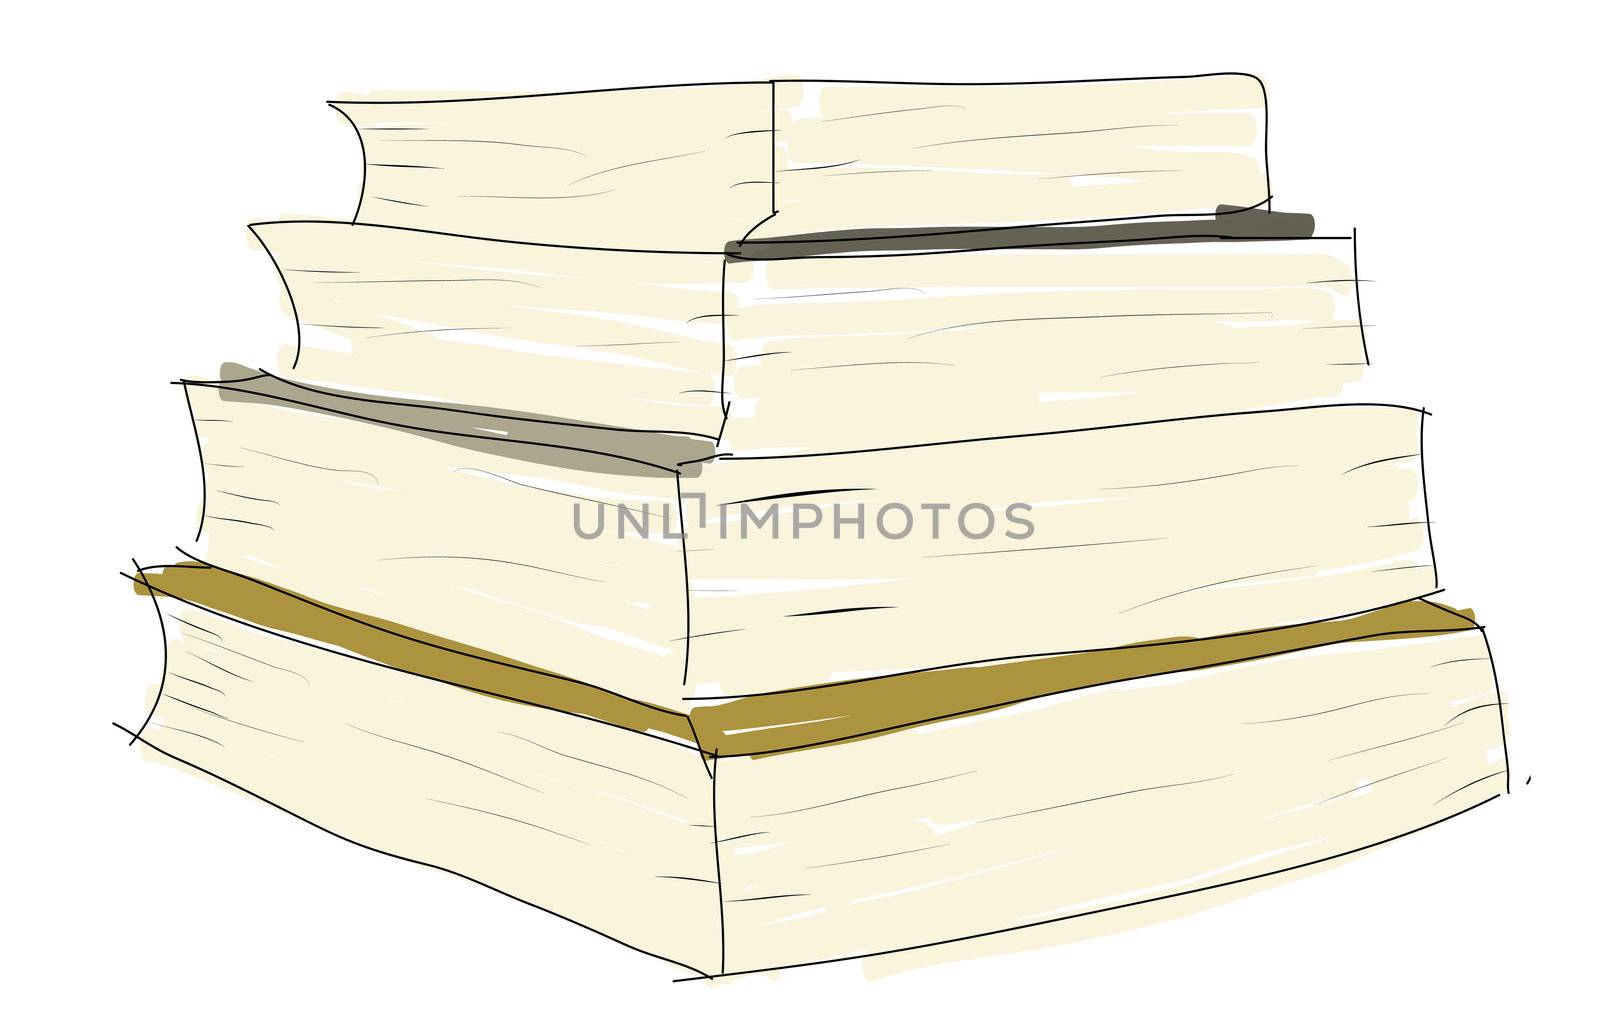 Stack of books (books stacked) by rufous